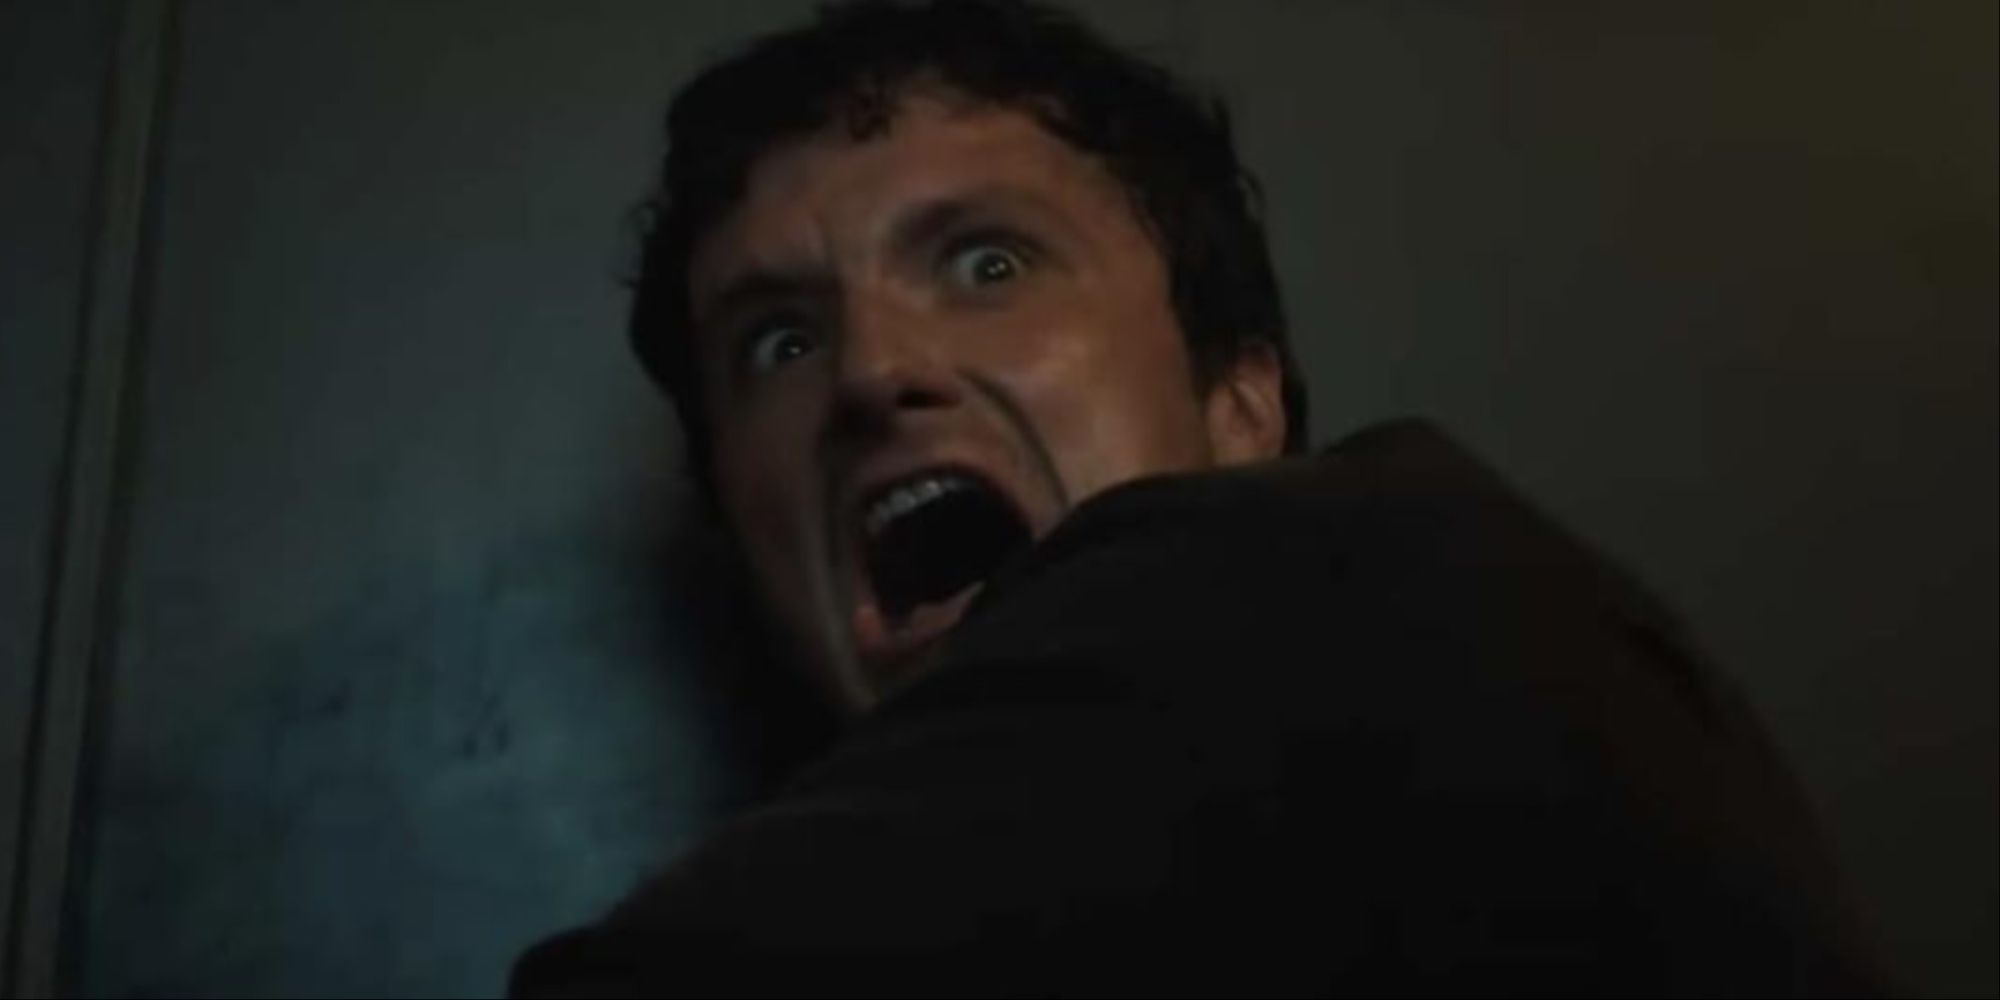 Josh Hutcherson on the ground screaming and horrified at something he's seeing in the FNAF movie.